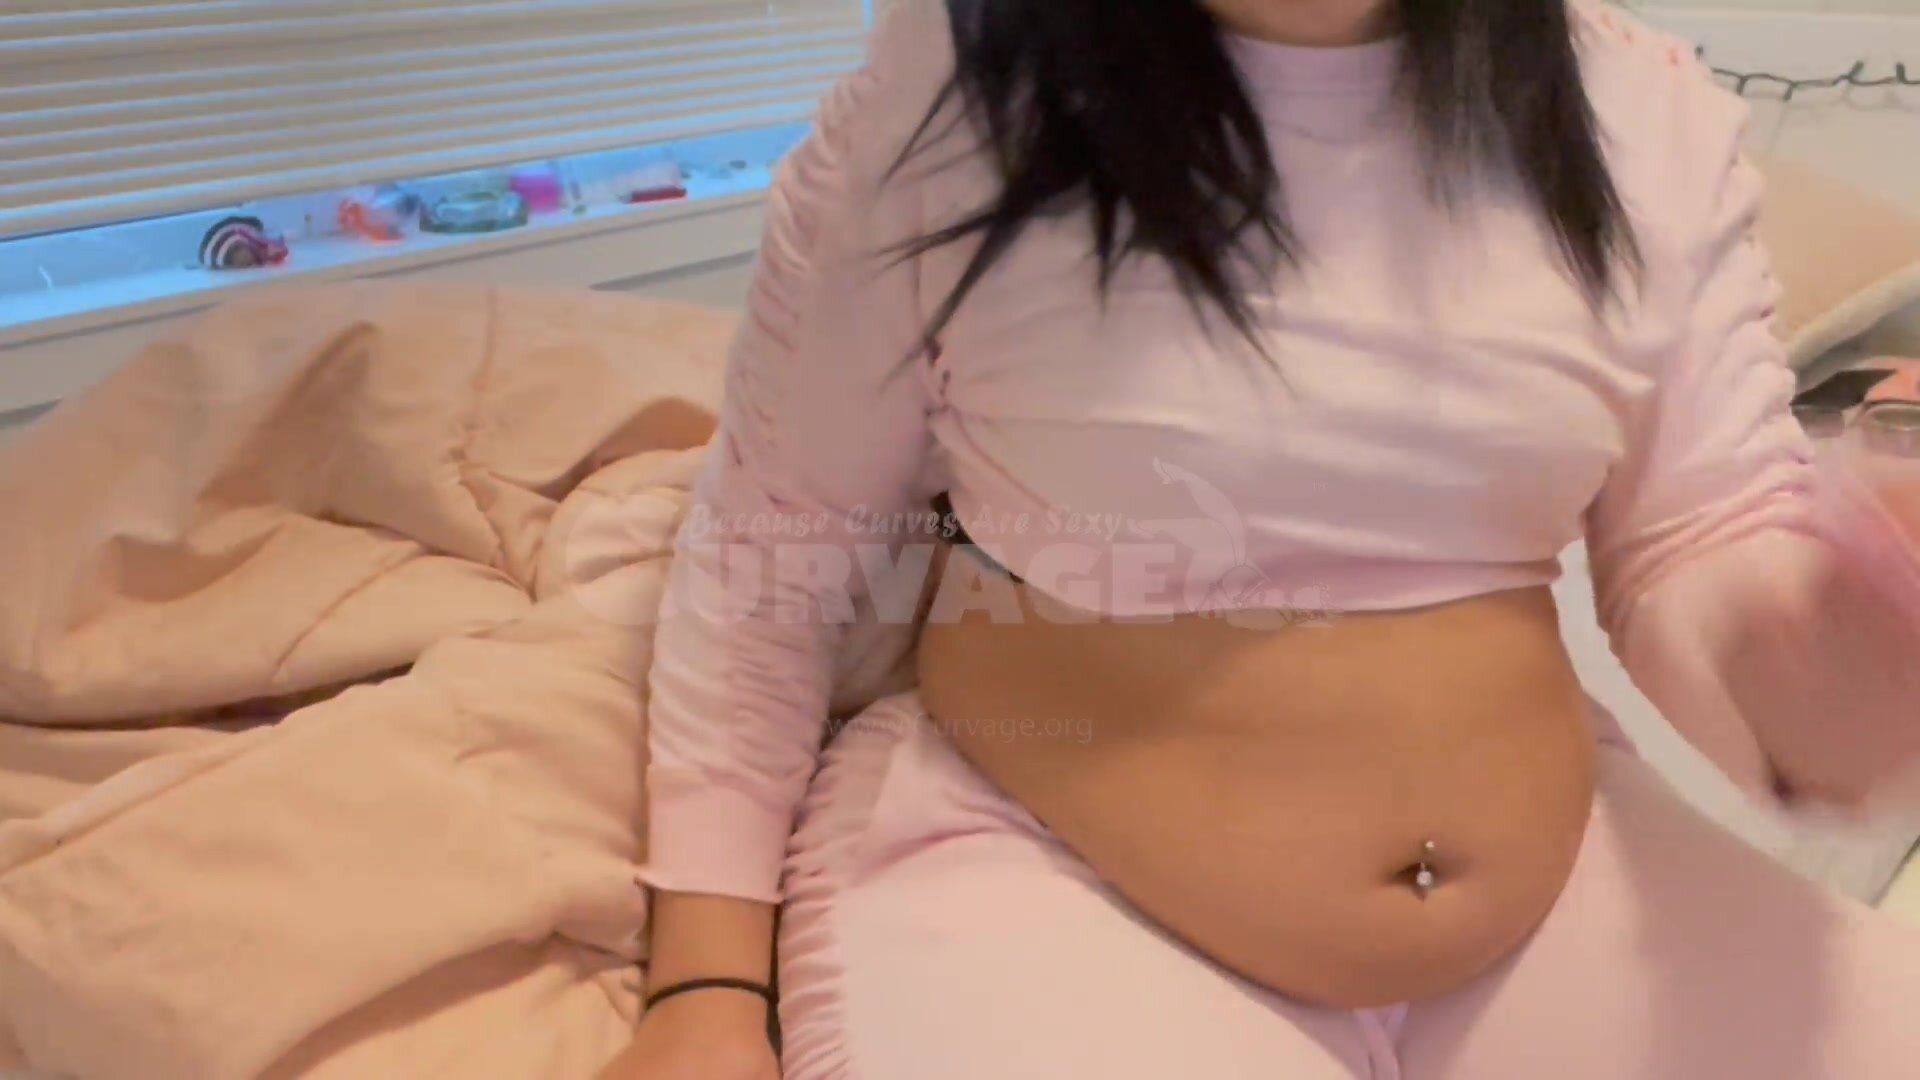 Belly play - video 26